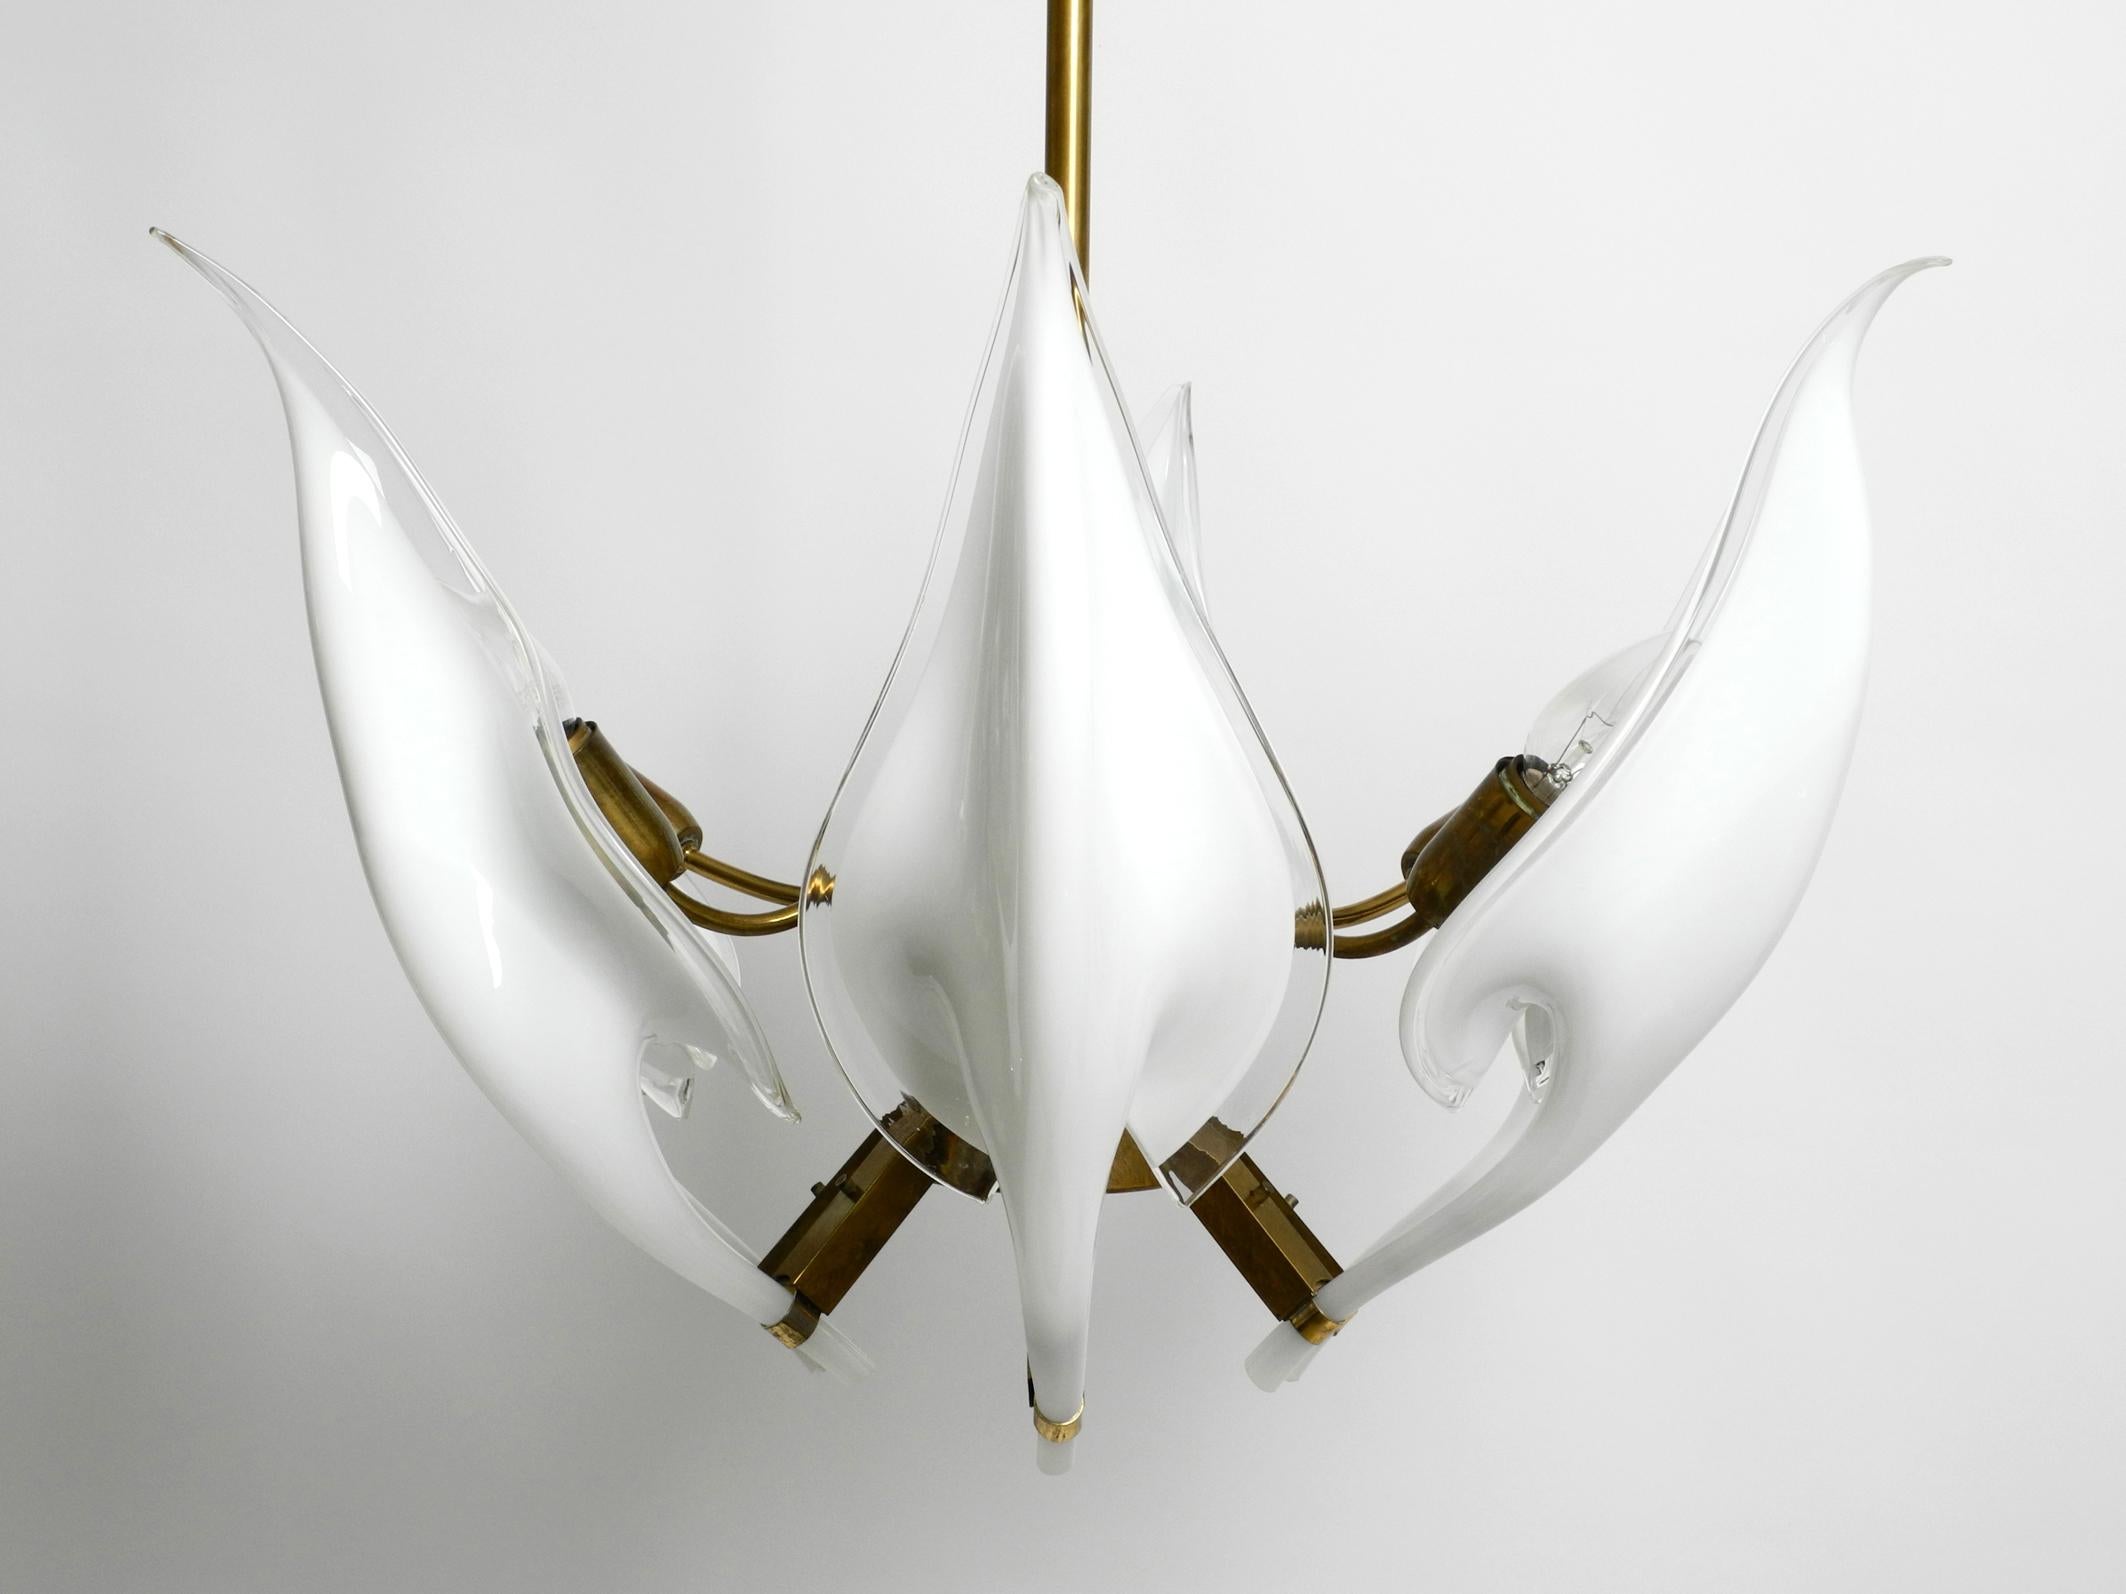 Beautiful large 1950s brass chandelier with white to transparent Murano glasses.
Designed by Franco Luce. Made in Italy.
Six long, transparent white glasses, curved in the shape of a flower petal.
Each glass is unique. That is why there are